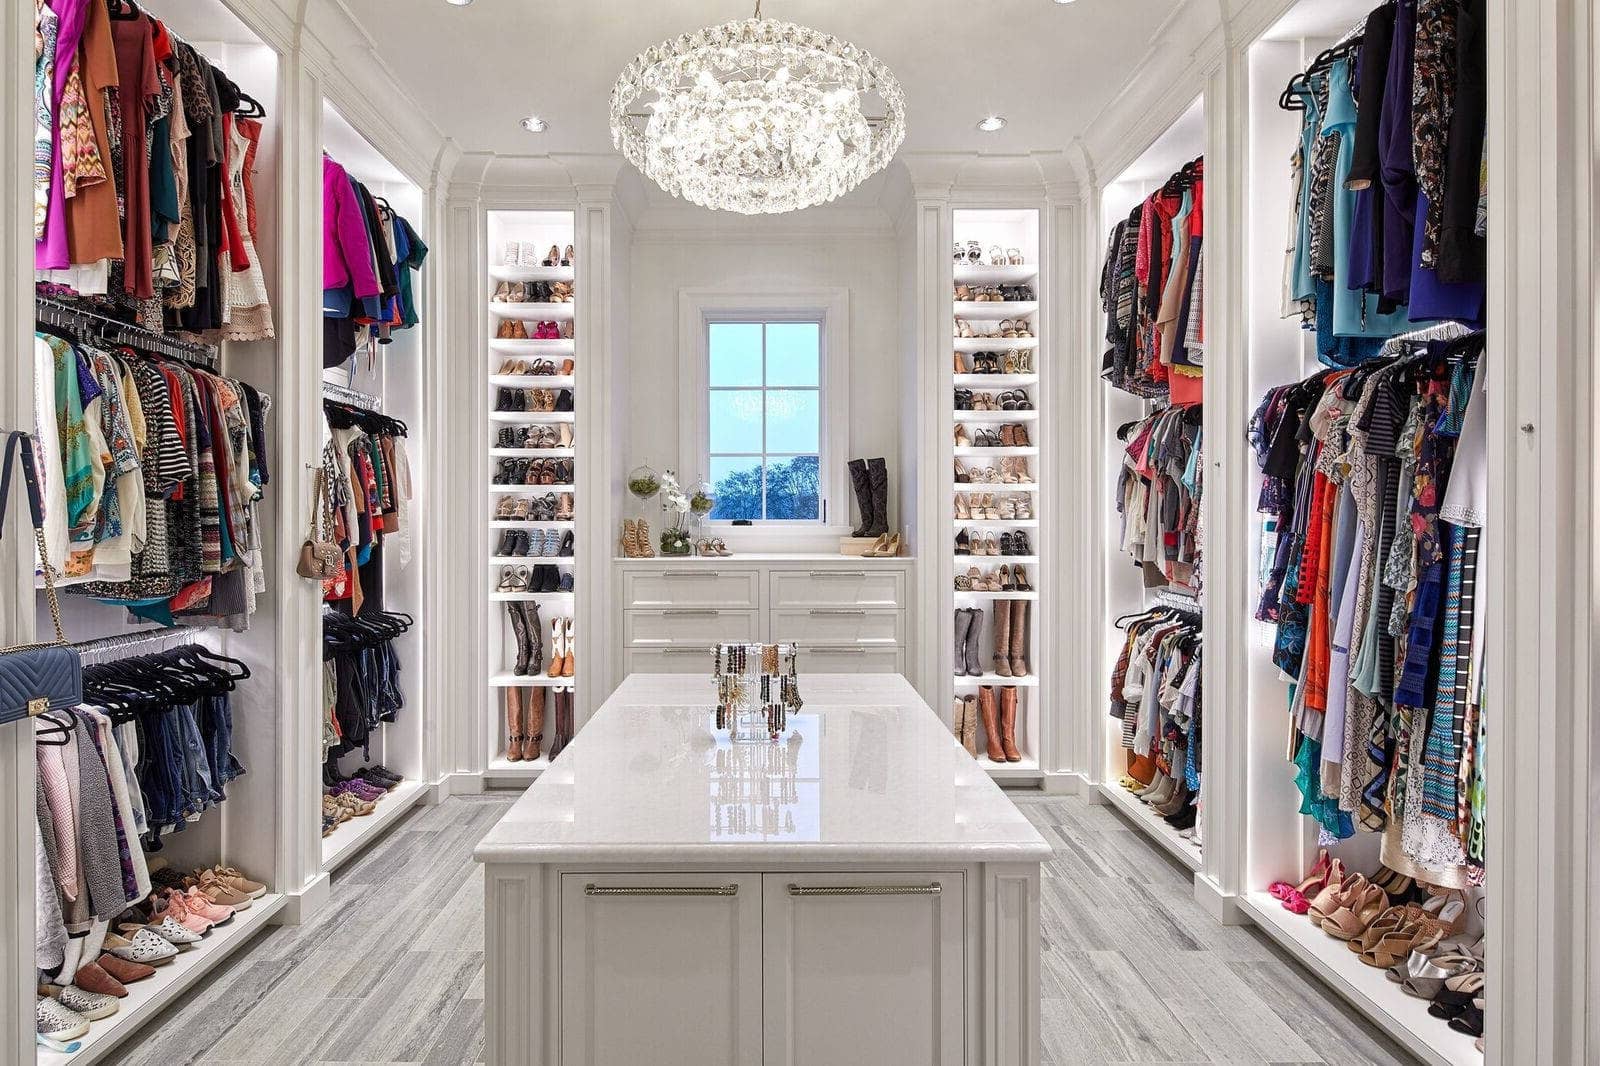 How To Organize A Walk-In Closet